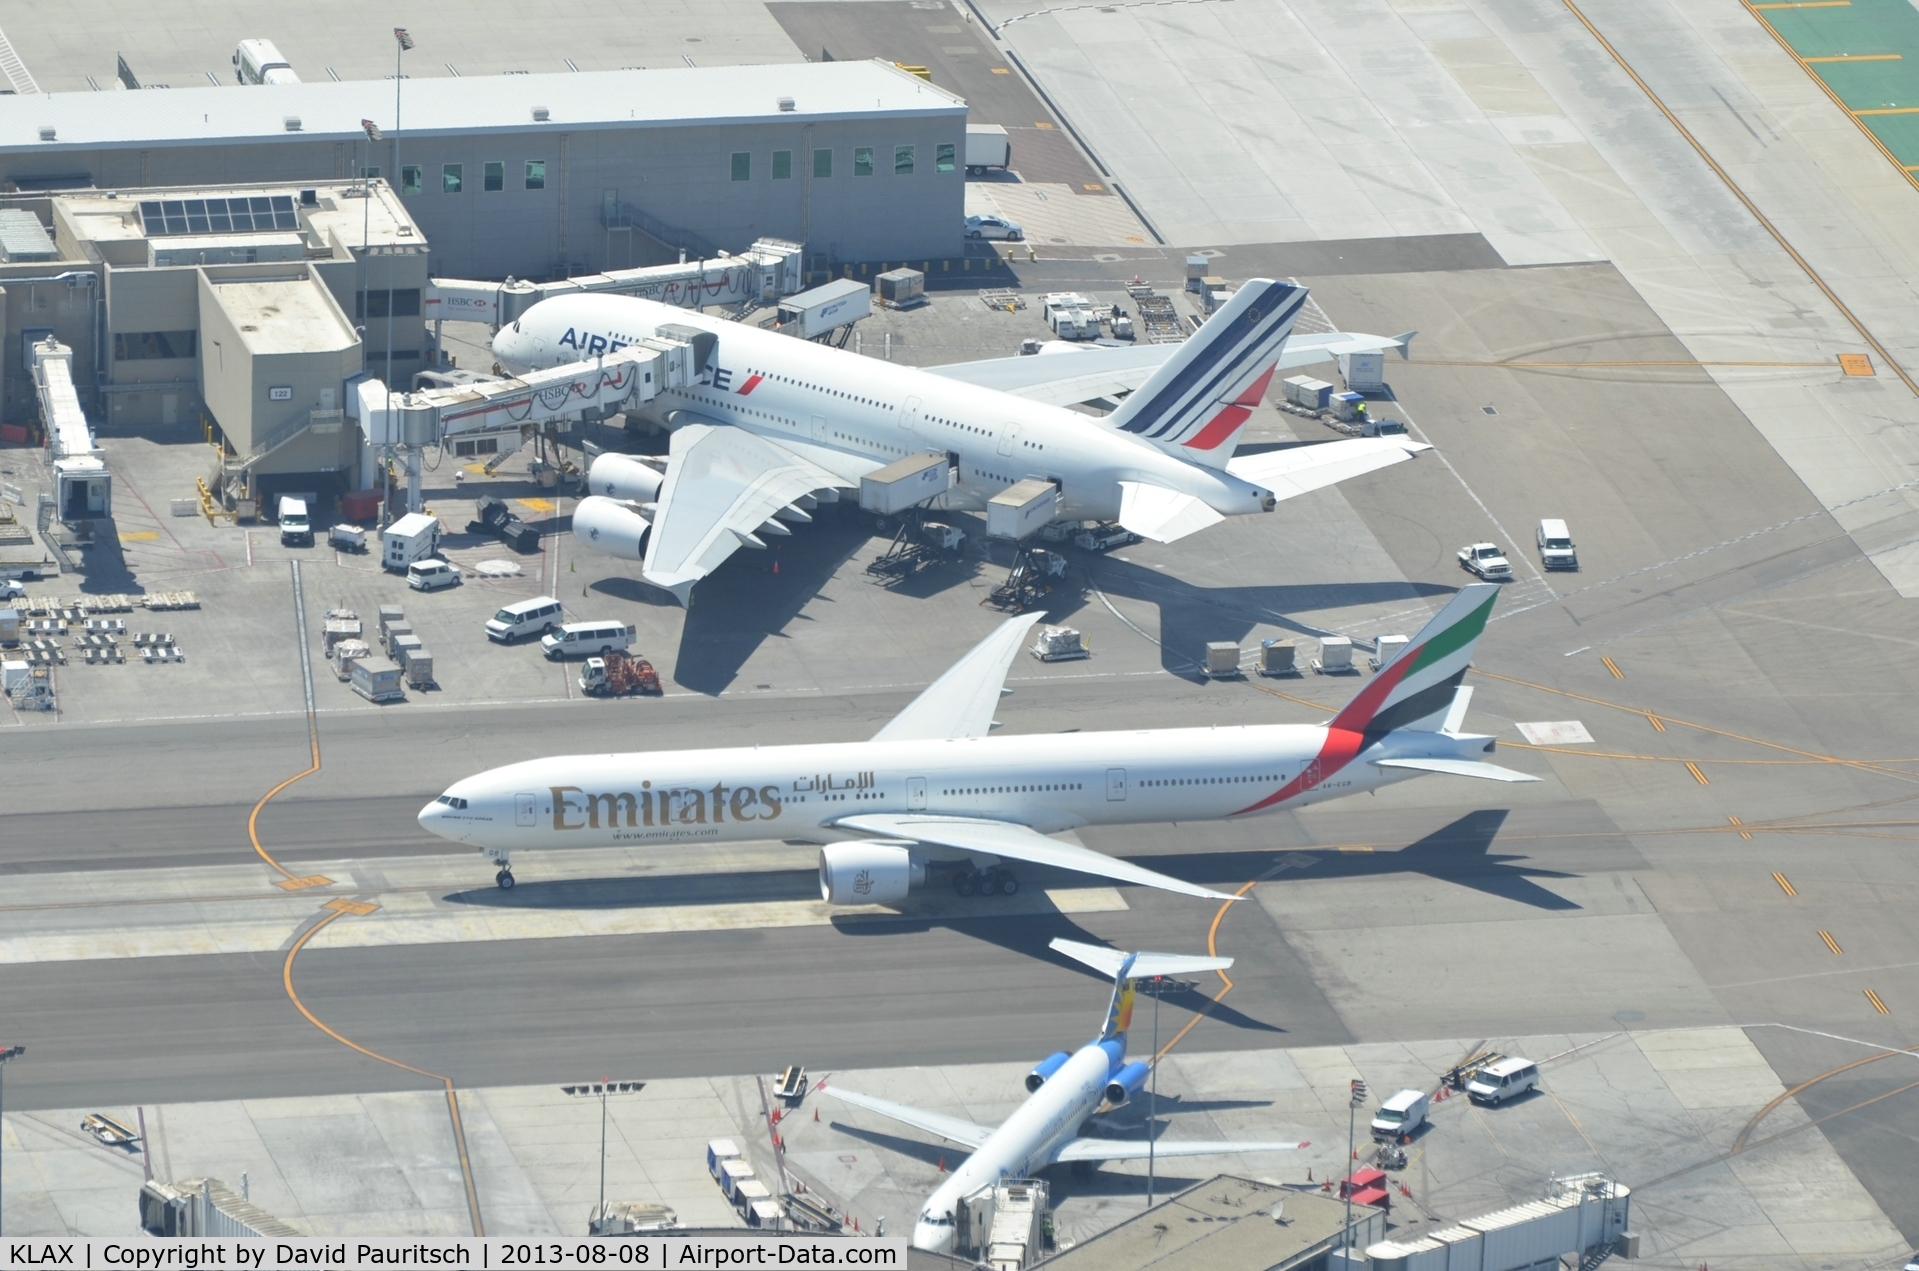 Los Angeles International Airport (LAX) - A380 and Boeing 777